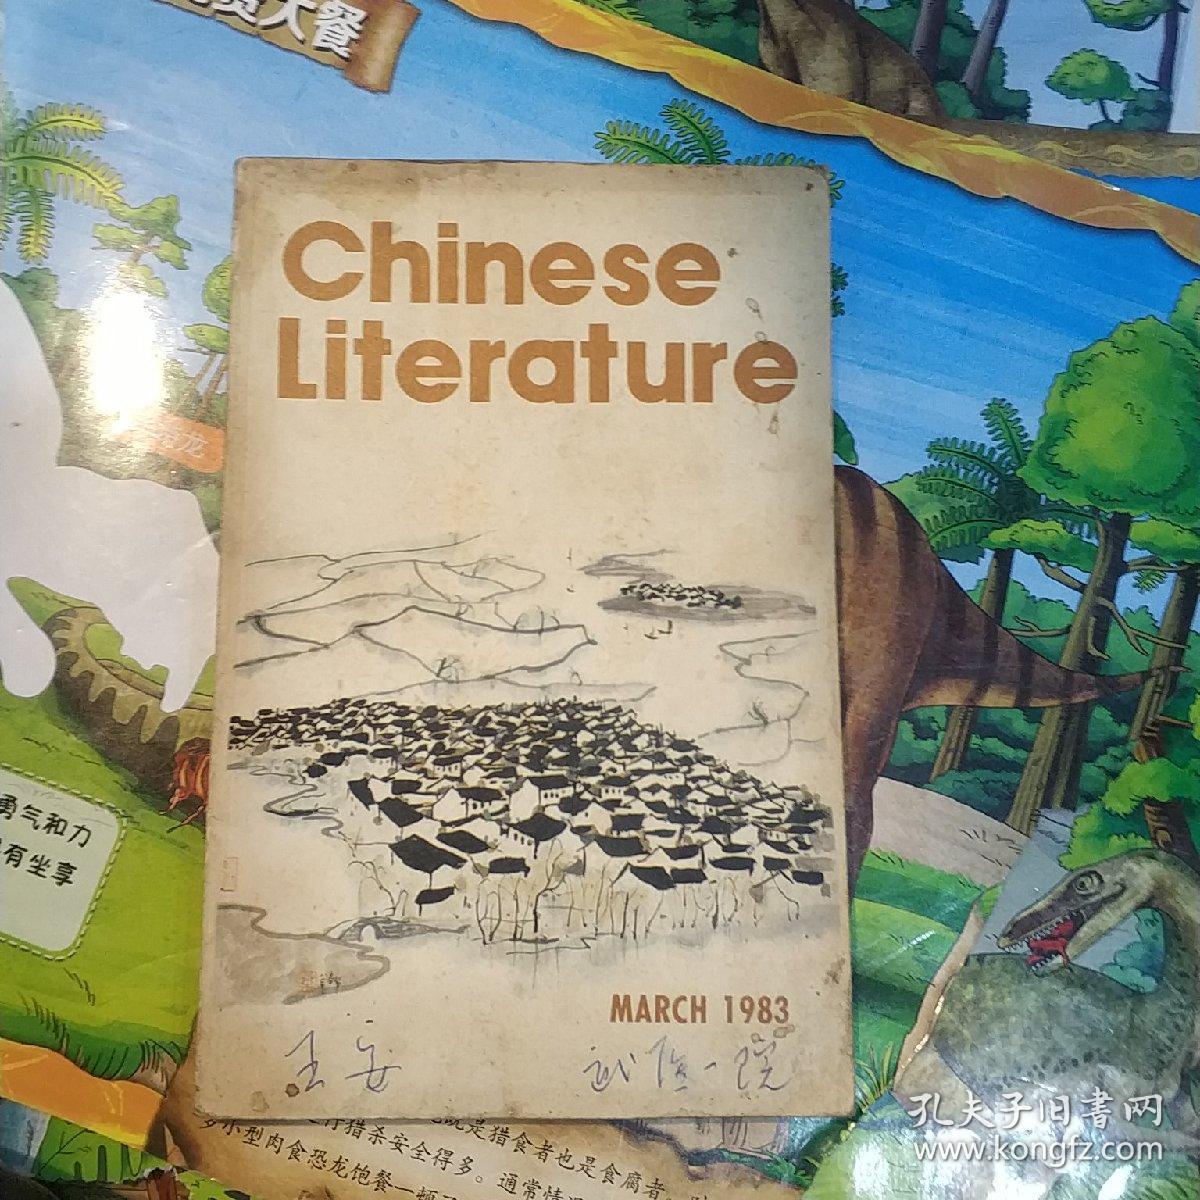 Chinese Literature （1983 MARCH）